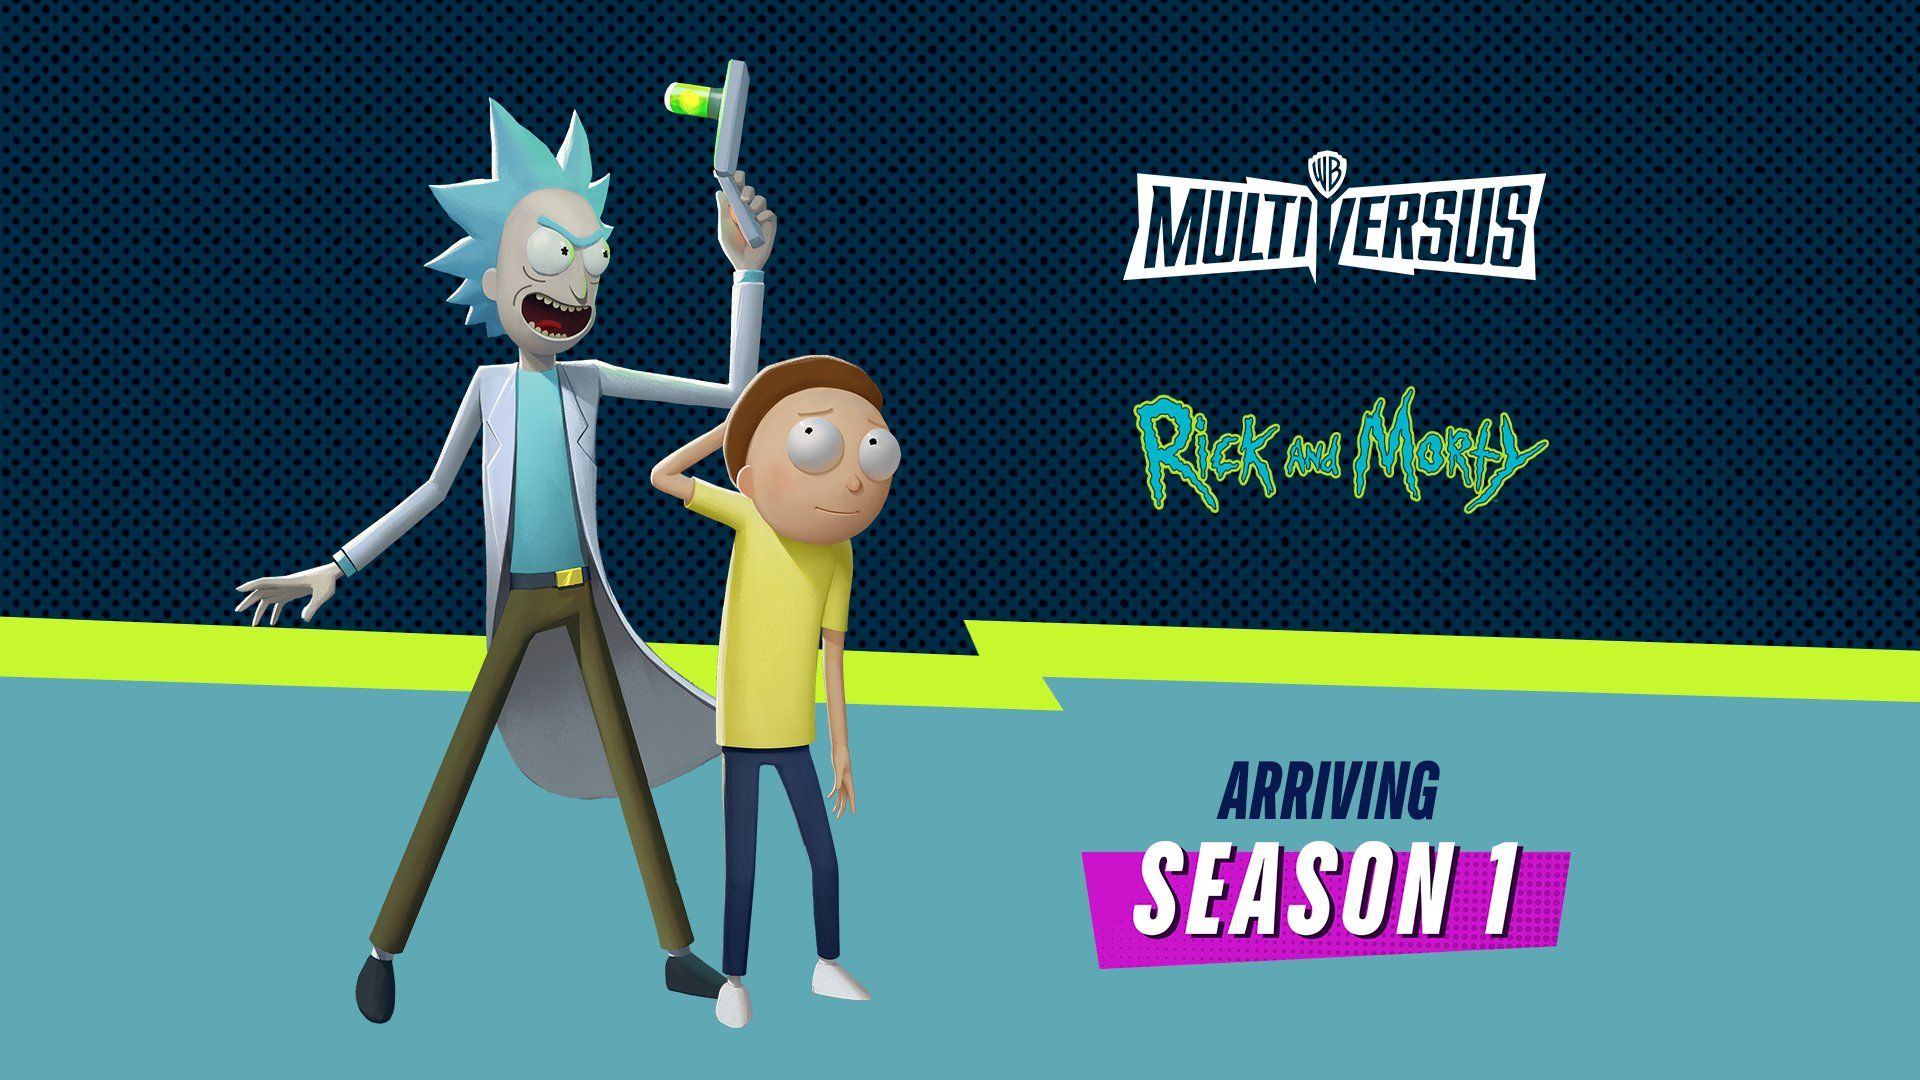 MultiVersus is Adding Rick and Morty and LeBron James to its Roster